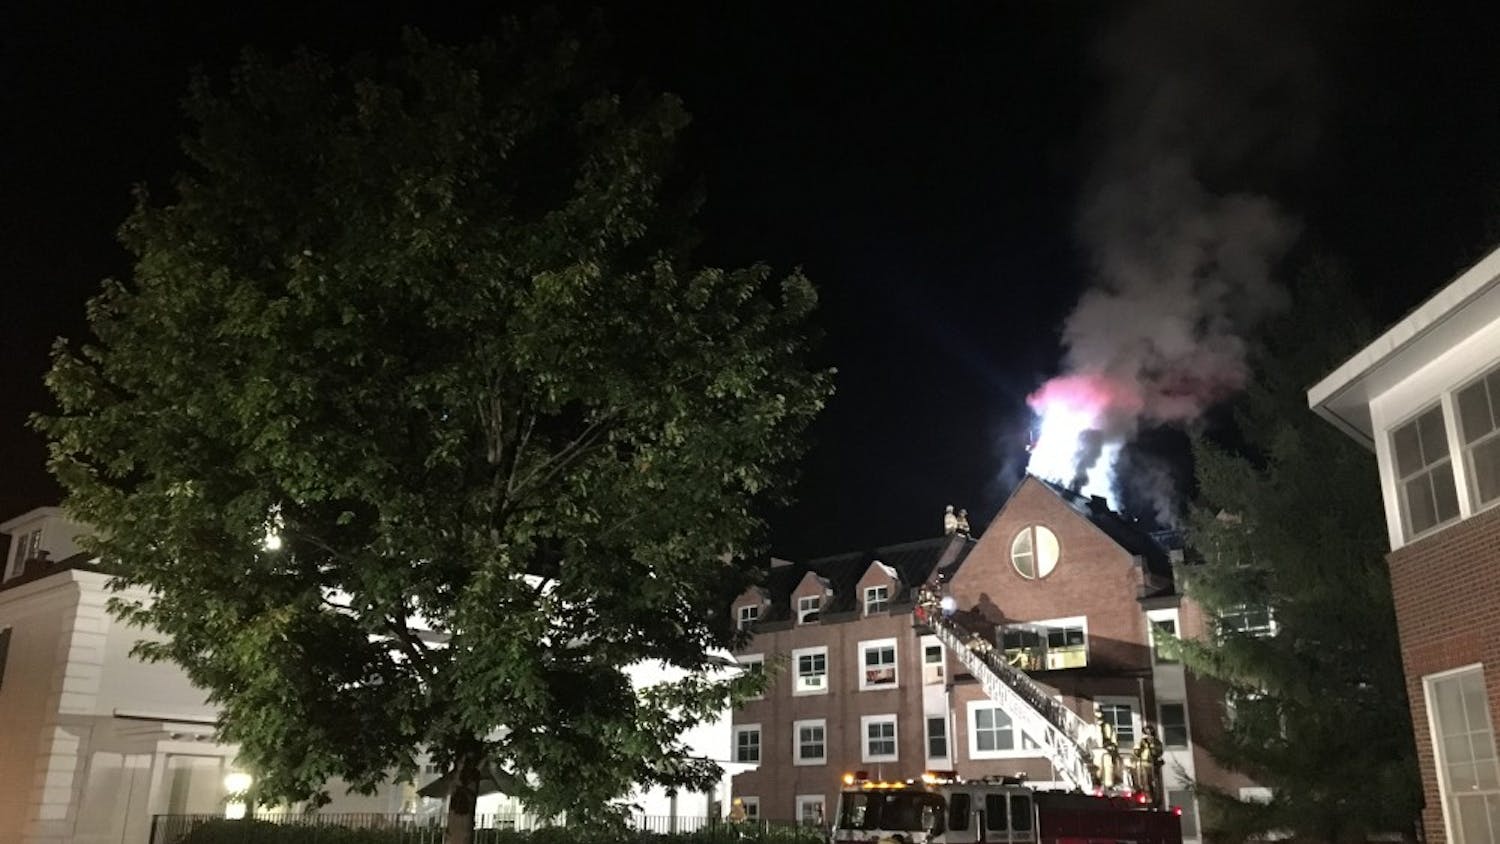 Morton Hall is currently uninhabitable as a result of extensive smoke and water damage caused by a four-alarm fire that started at 12:05 a.m.&nbsp;